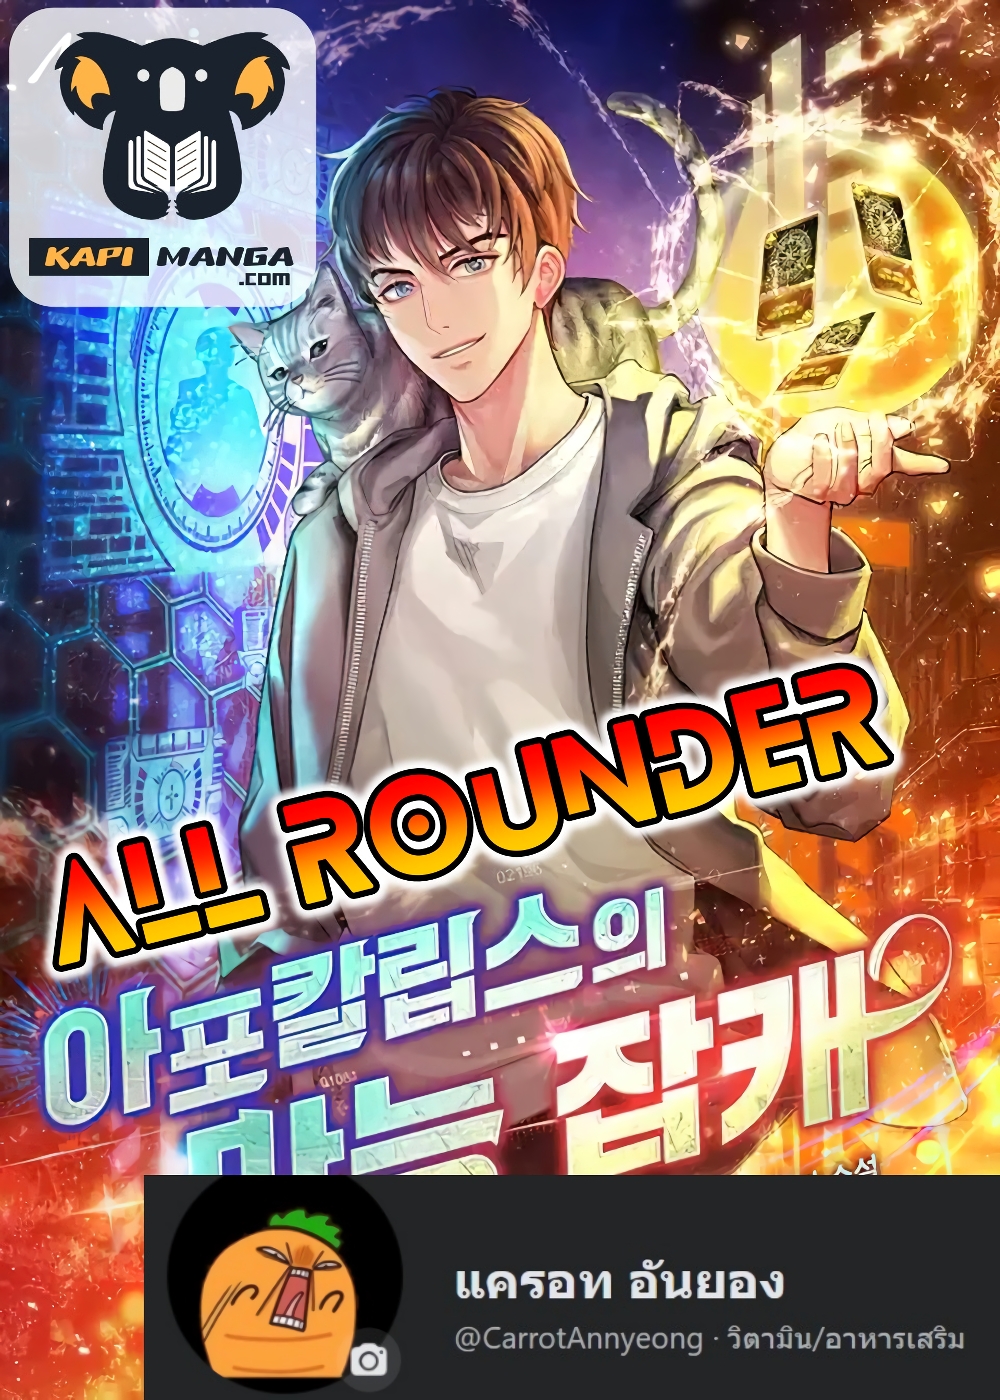 All Rounder8 (1)